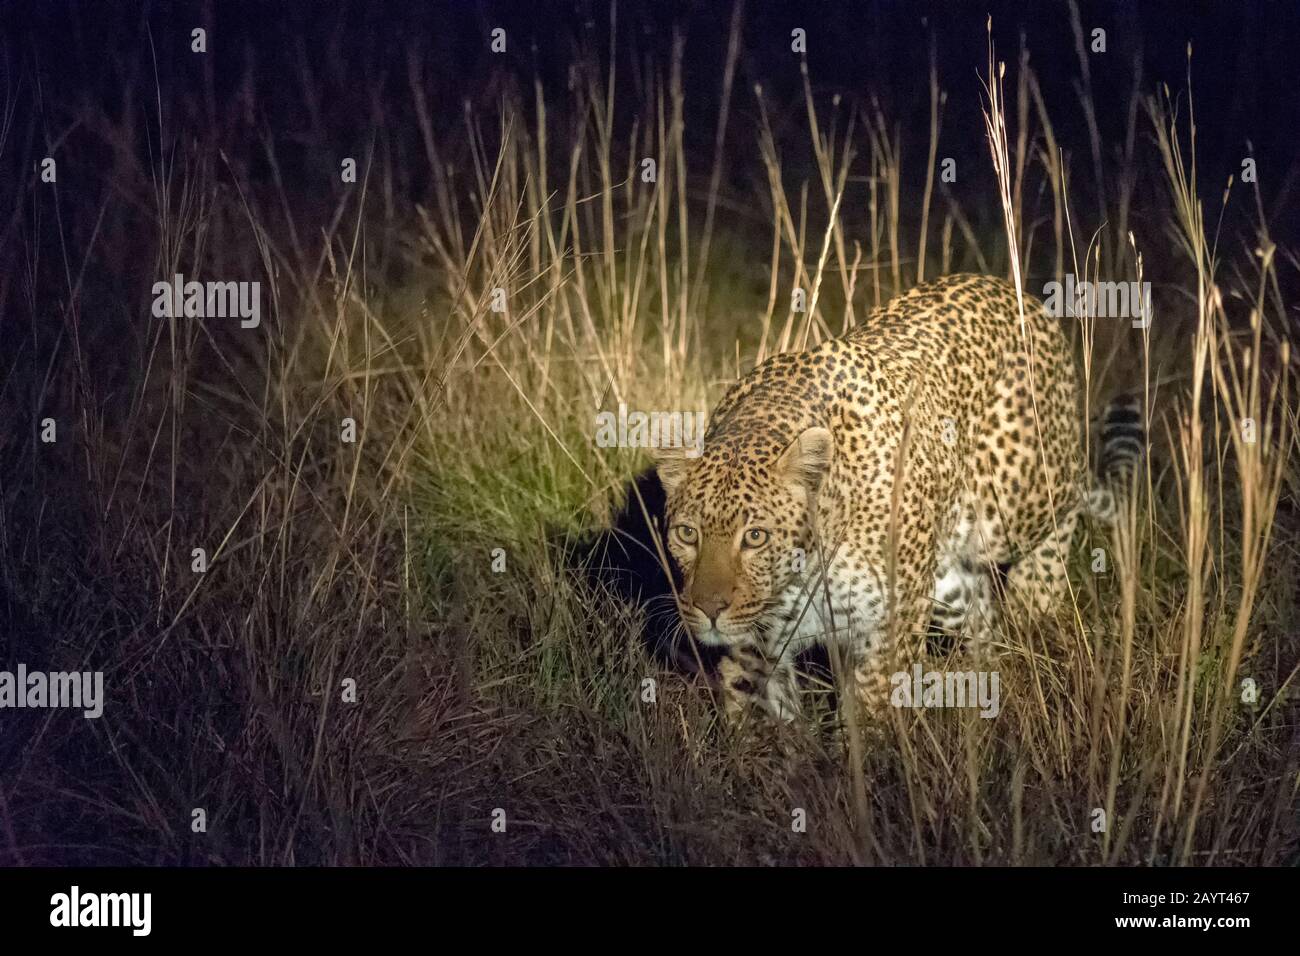 A leopard is hunting at night in the grasslands of the Nyika Plateau, Nyika National Park in Malawi. Stock Photo